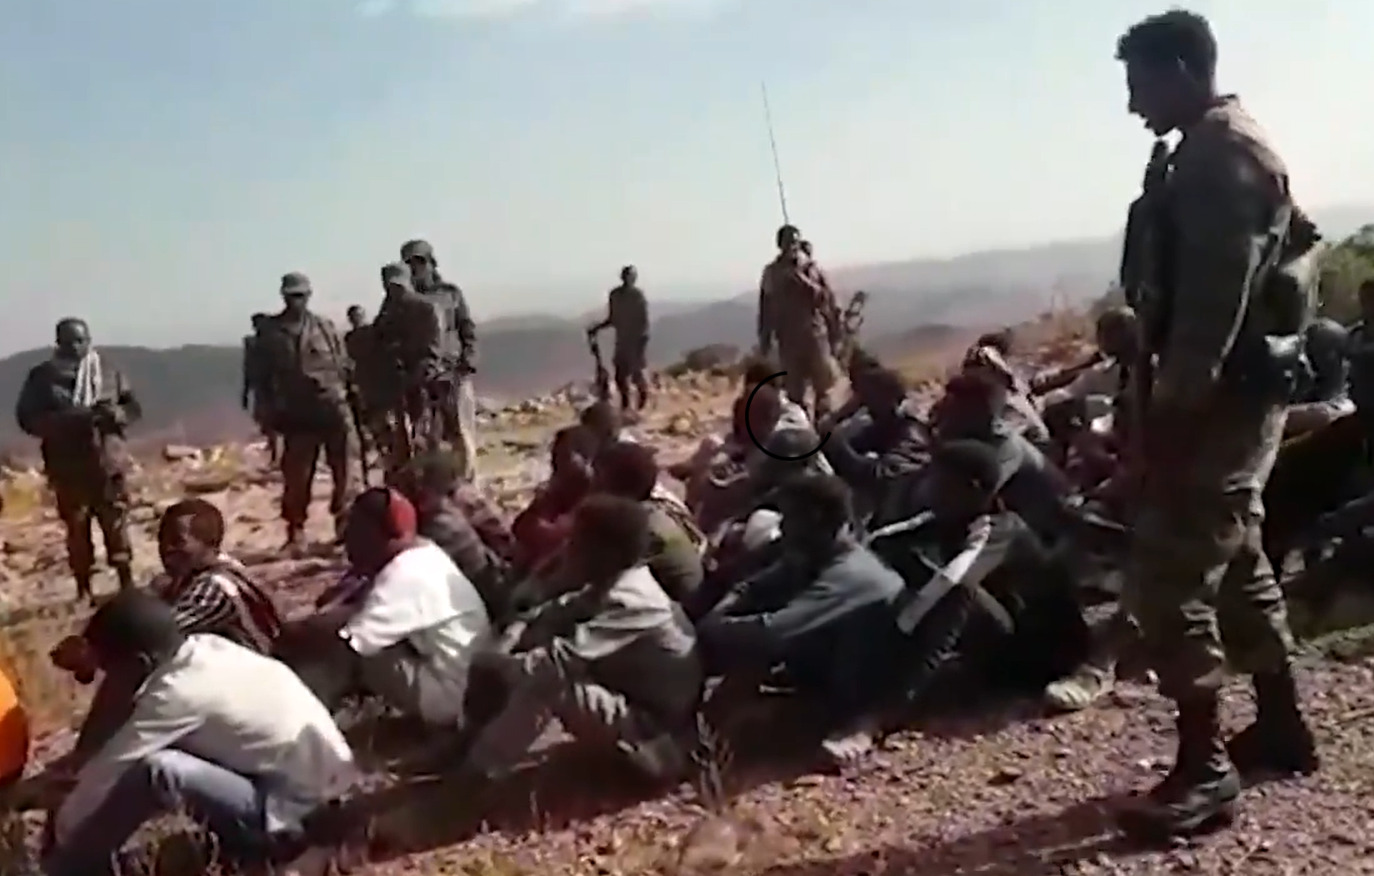 Ethiopia VS CNN: Video Of Horrific Executions In Tigray Spreads Online